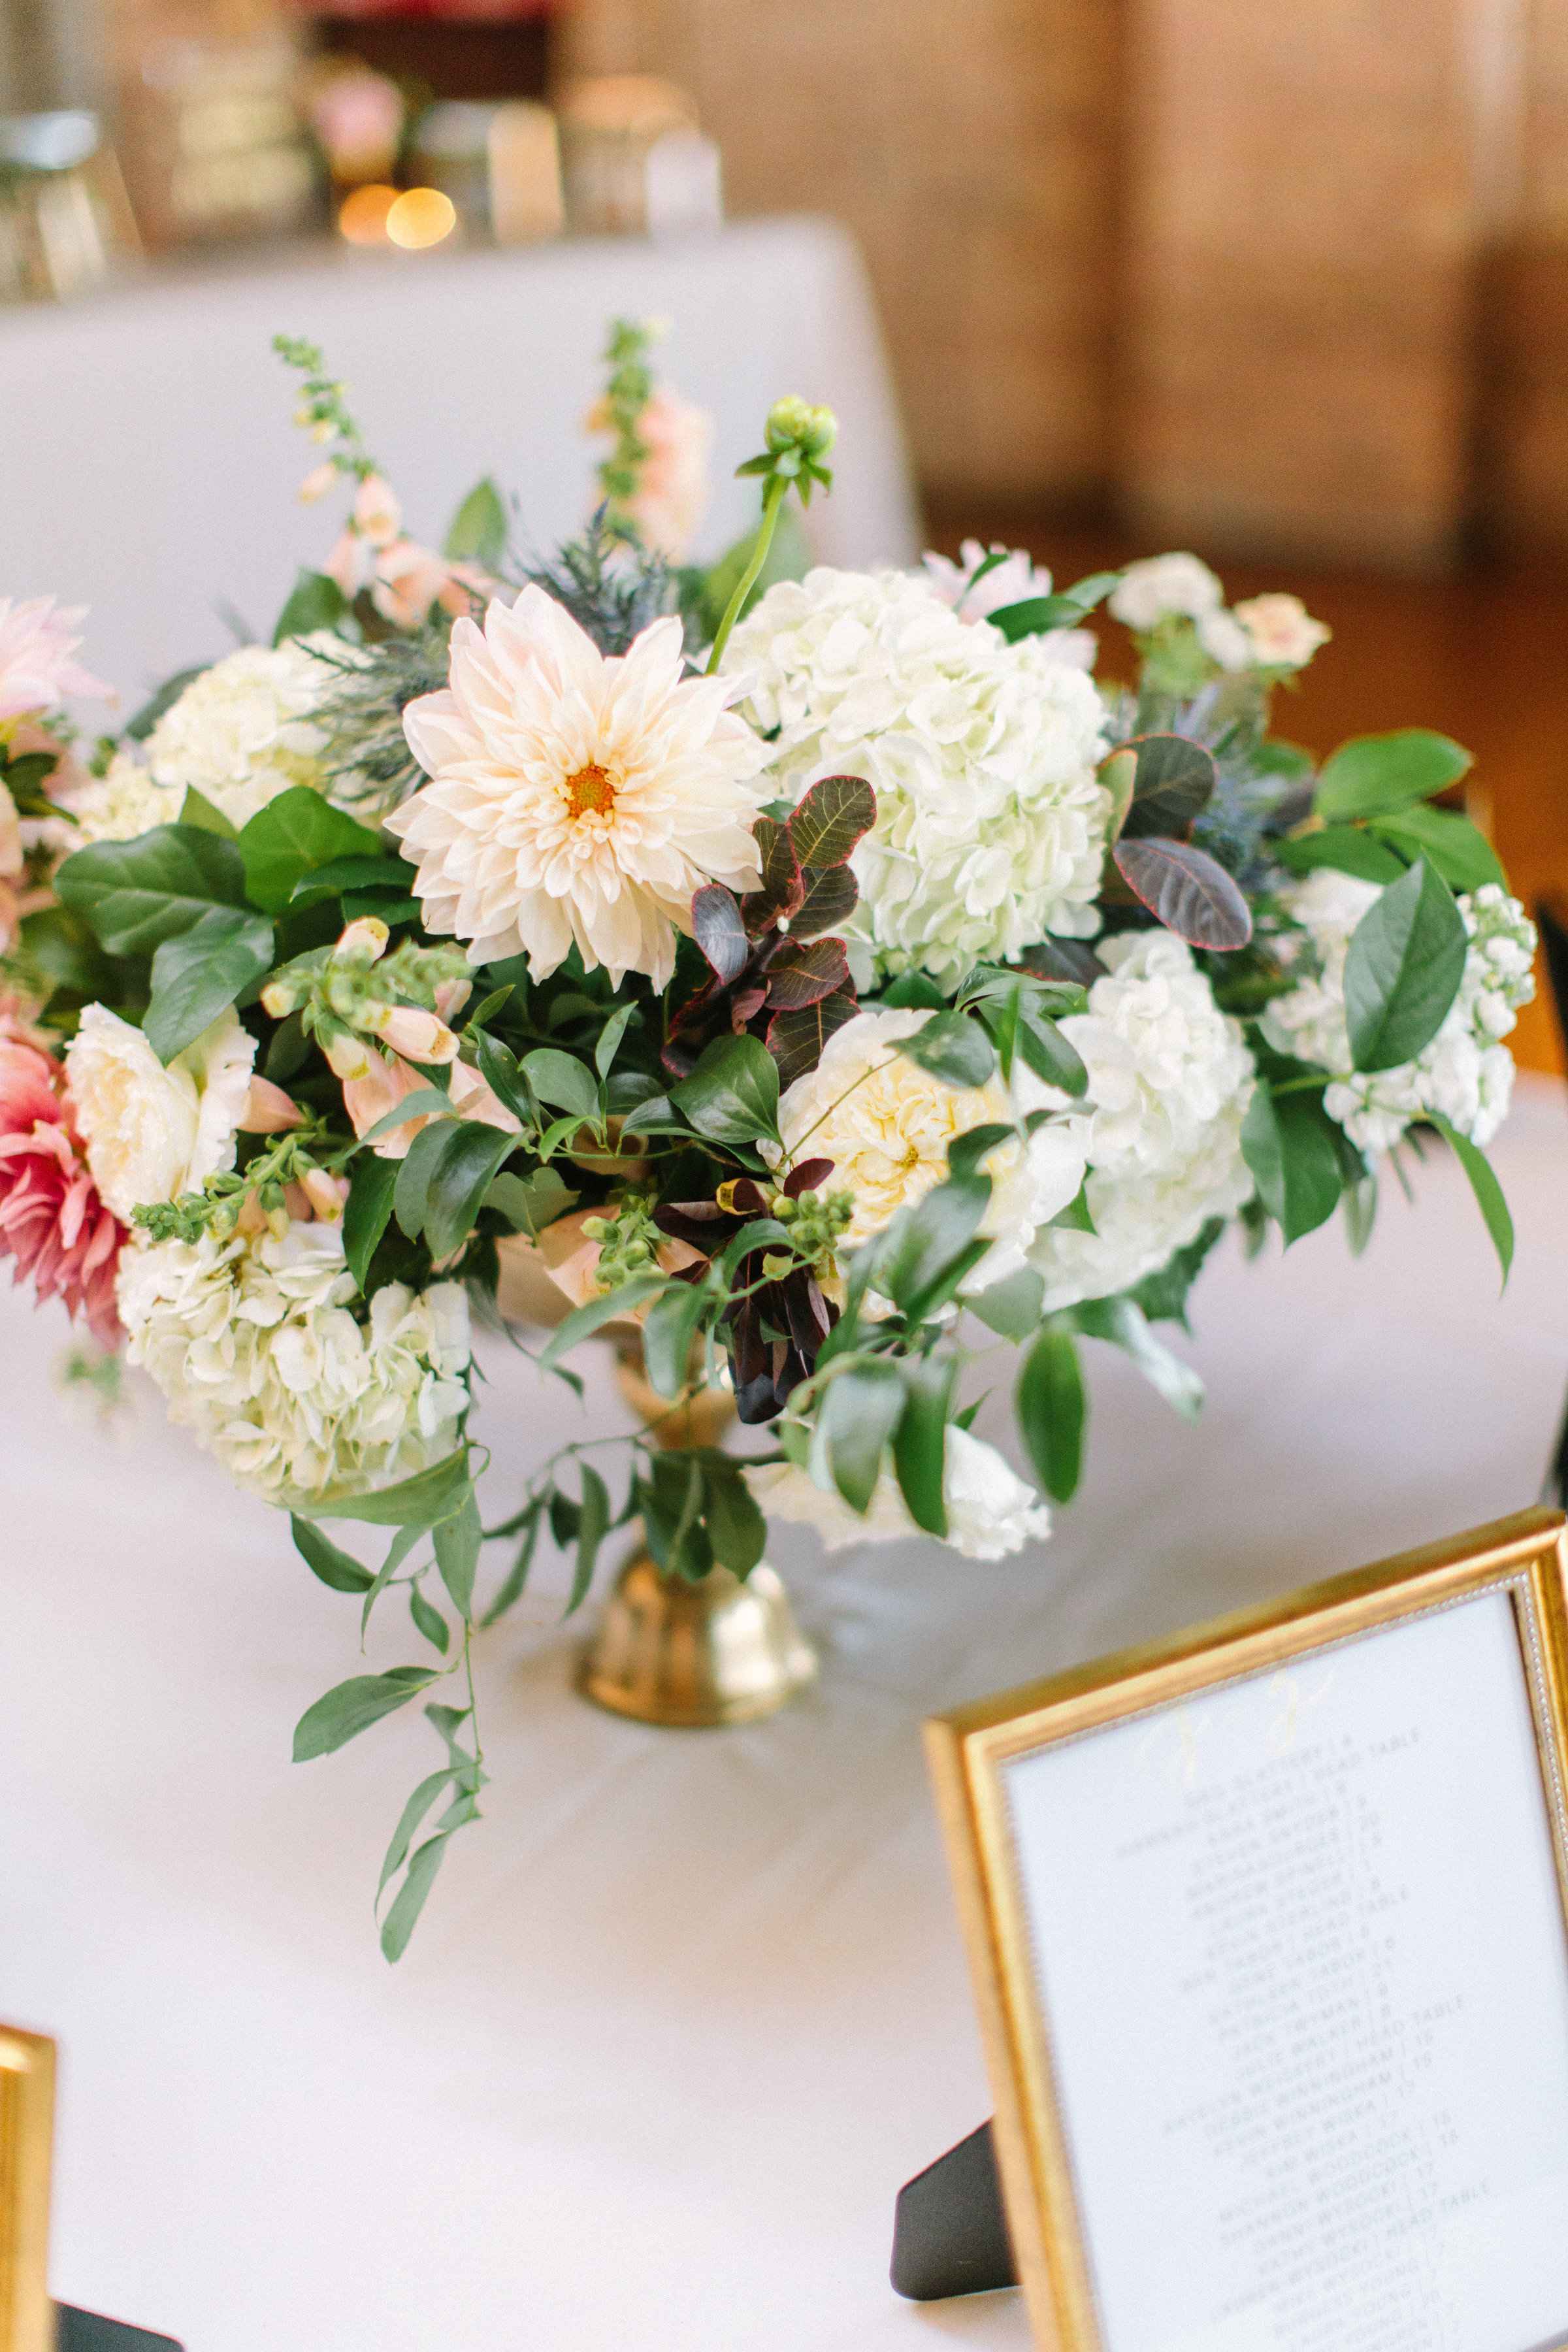 Welcome table arrangement at fall wedding at Bridgeport Art Center with white hydrangea and dahlias.